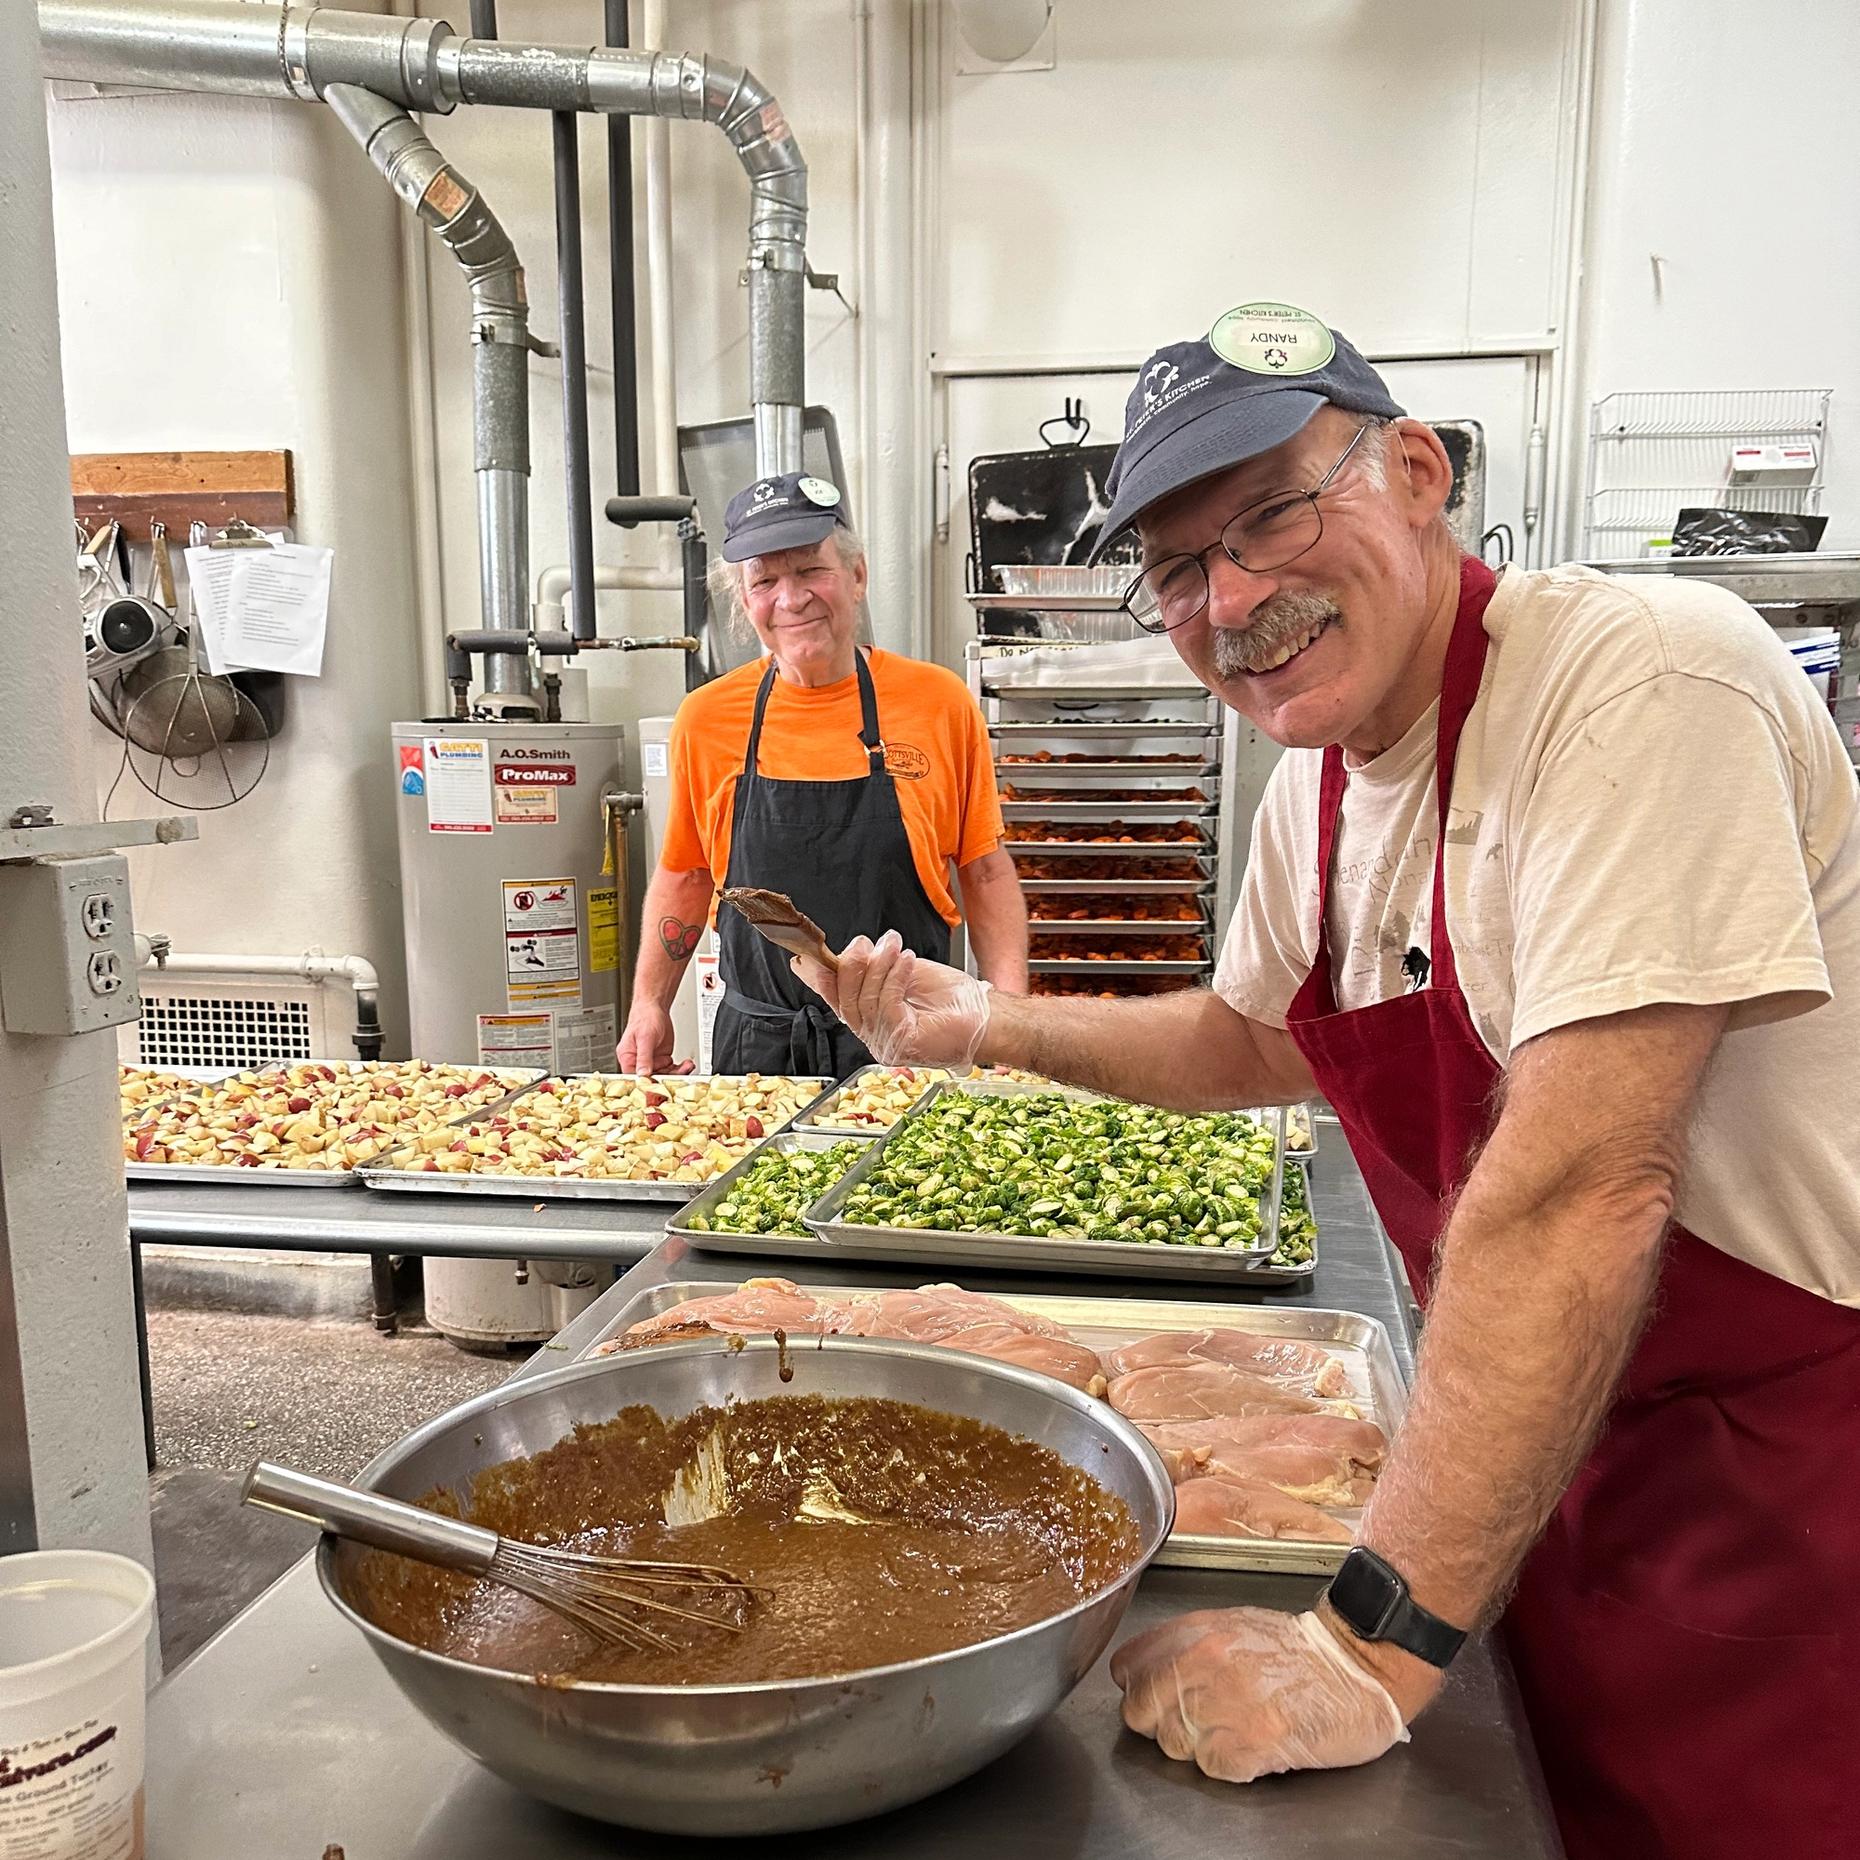 Volunteer cooks Joe and Randy prepare chicken and vegetables in the kitchen